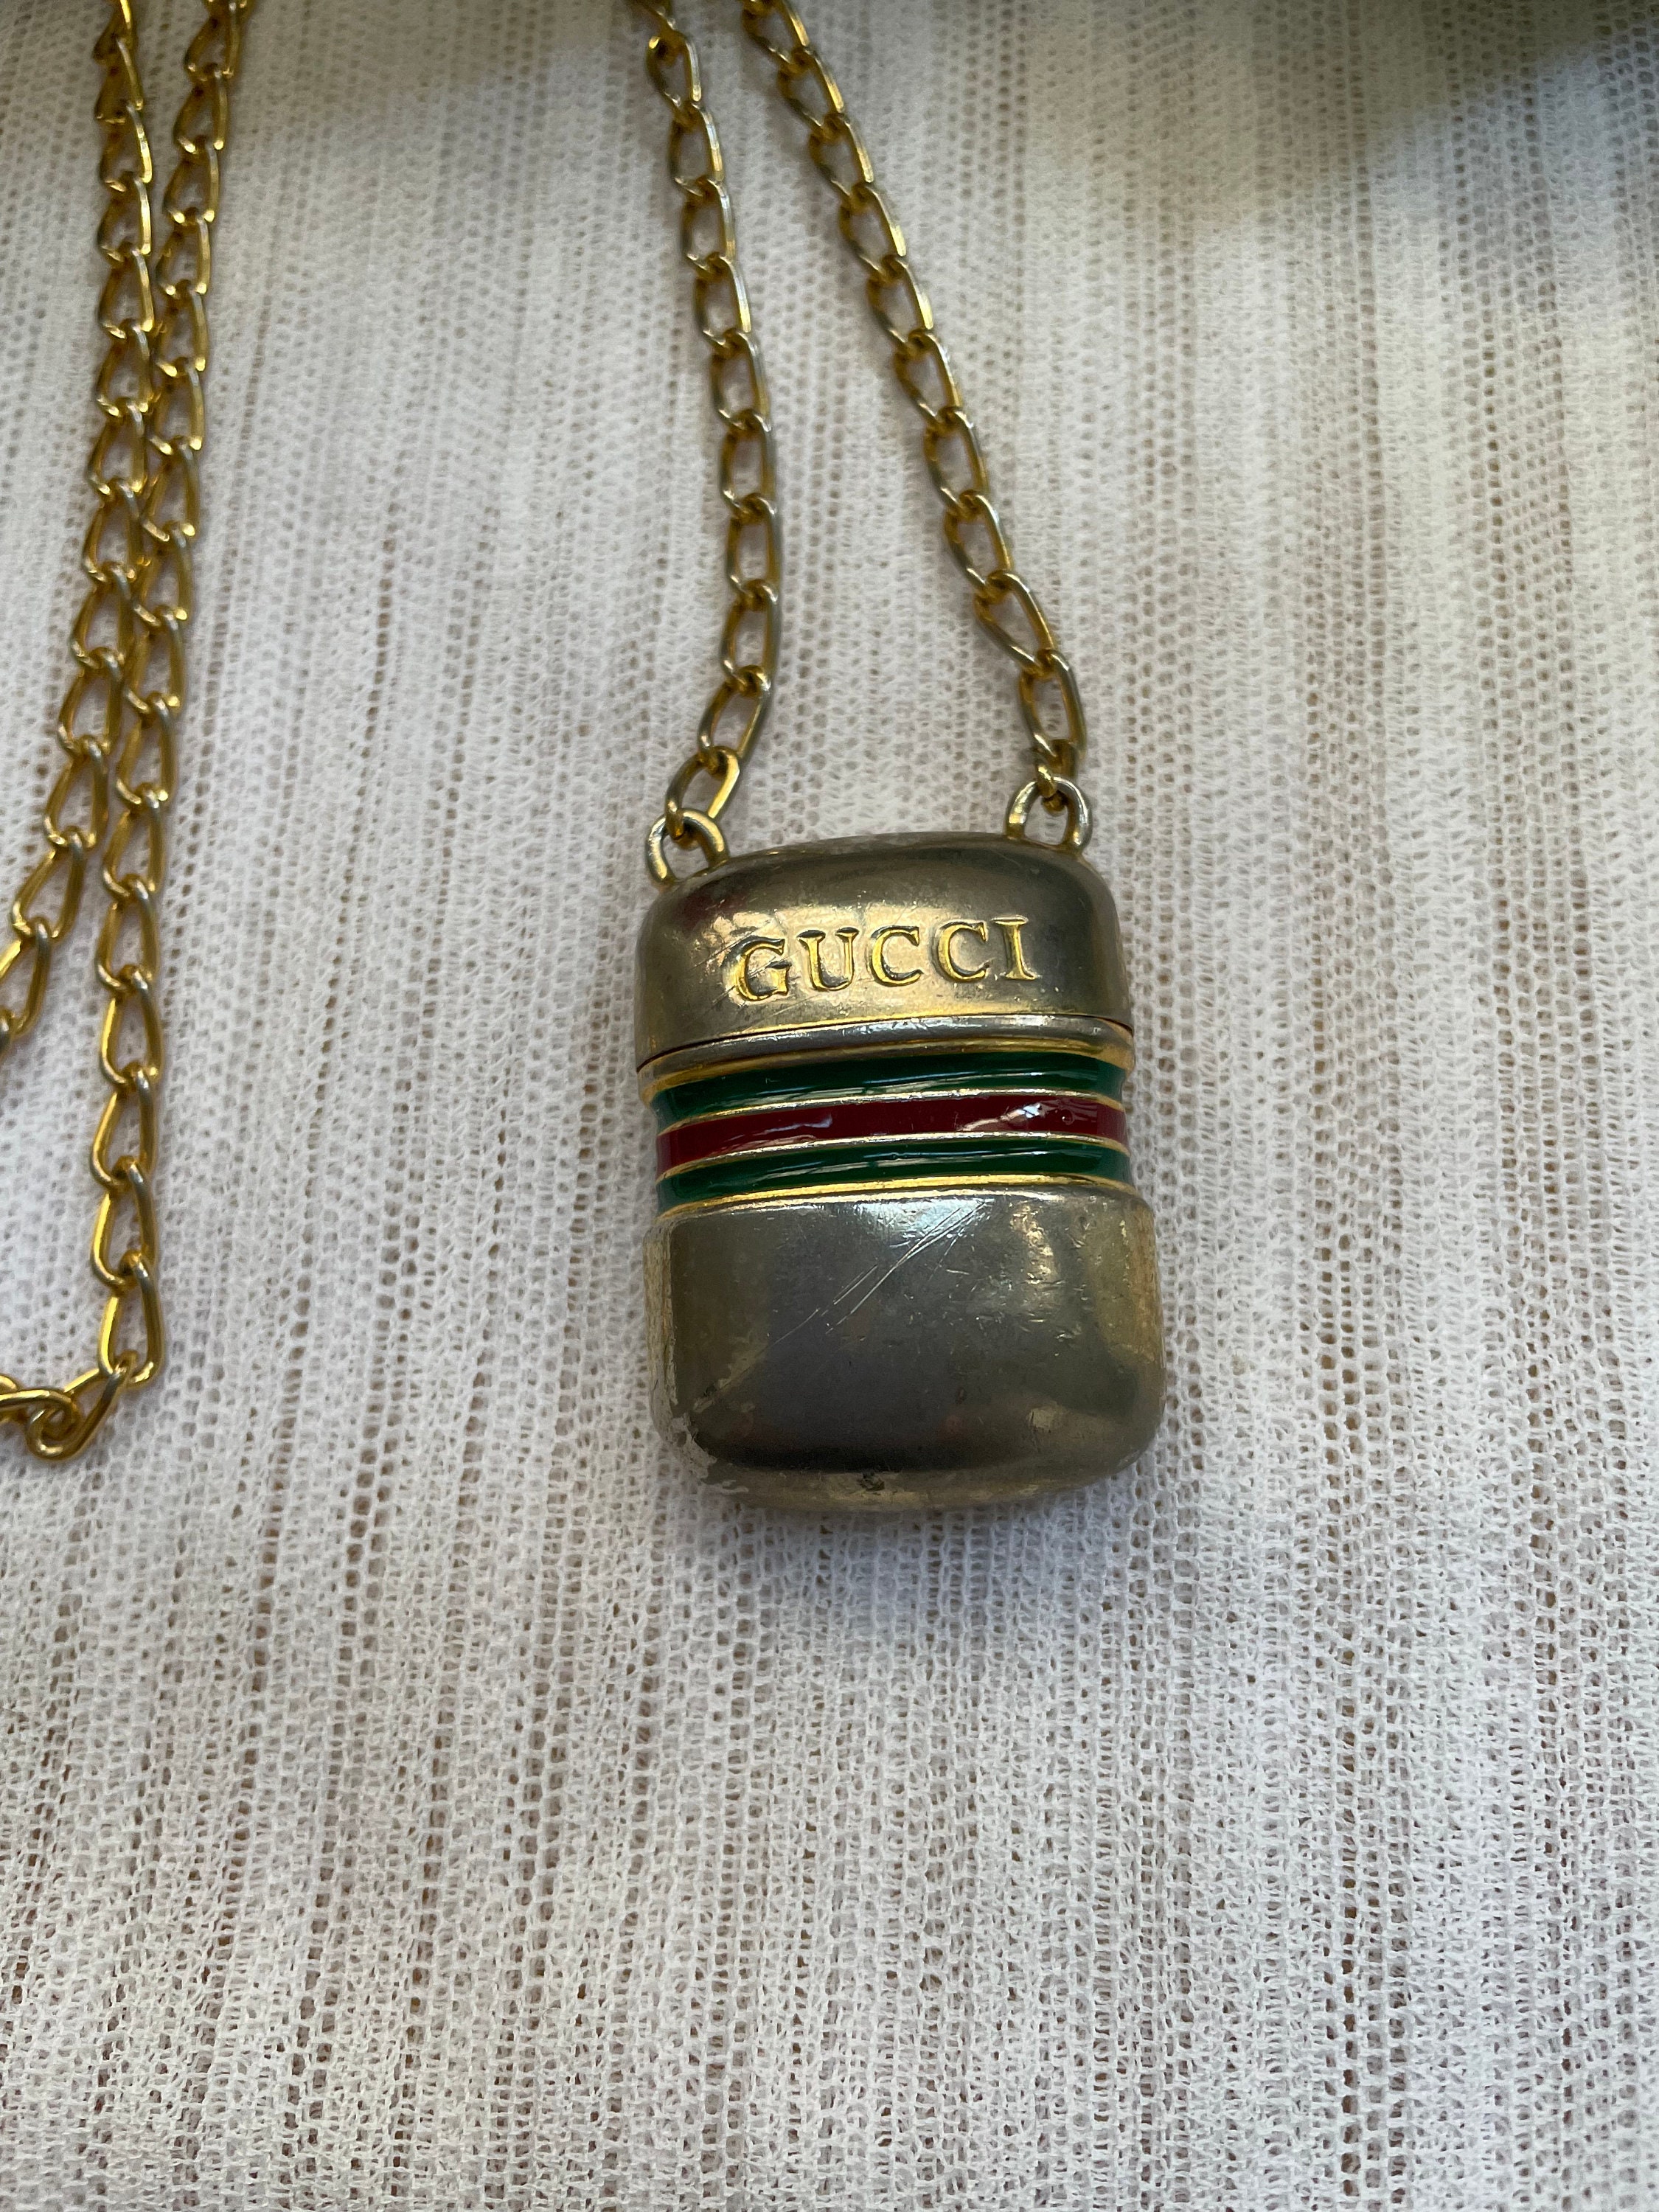 GUCCI Vintage Pill Box Chain Necklace -  Israel